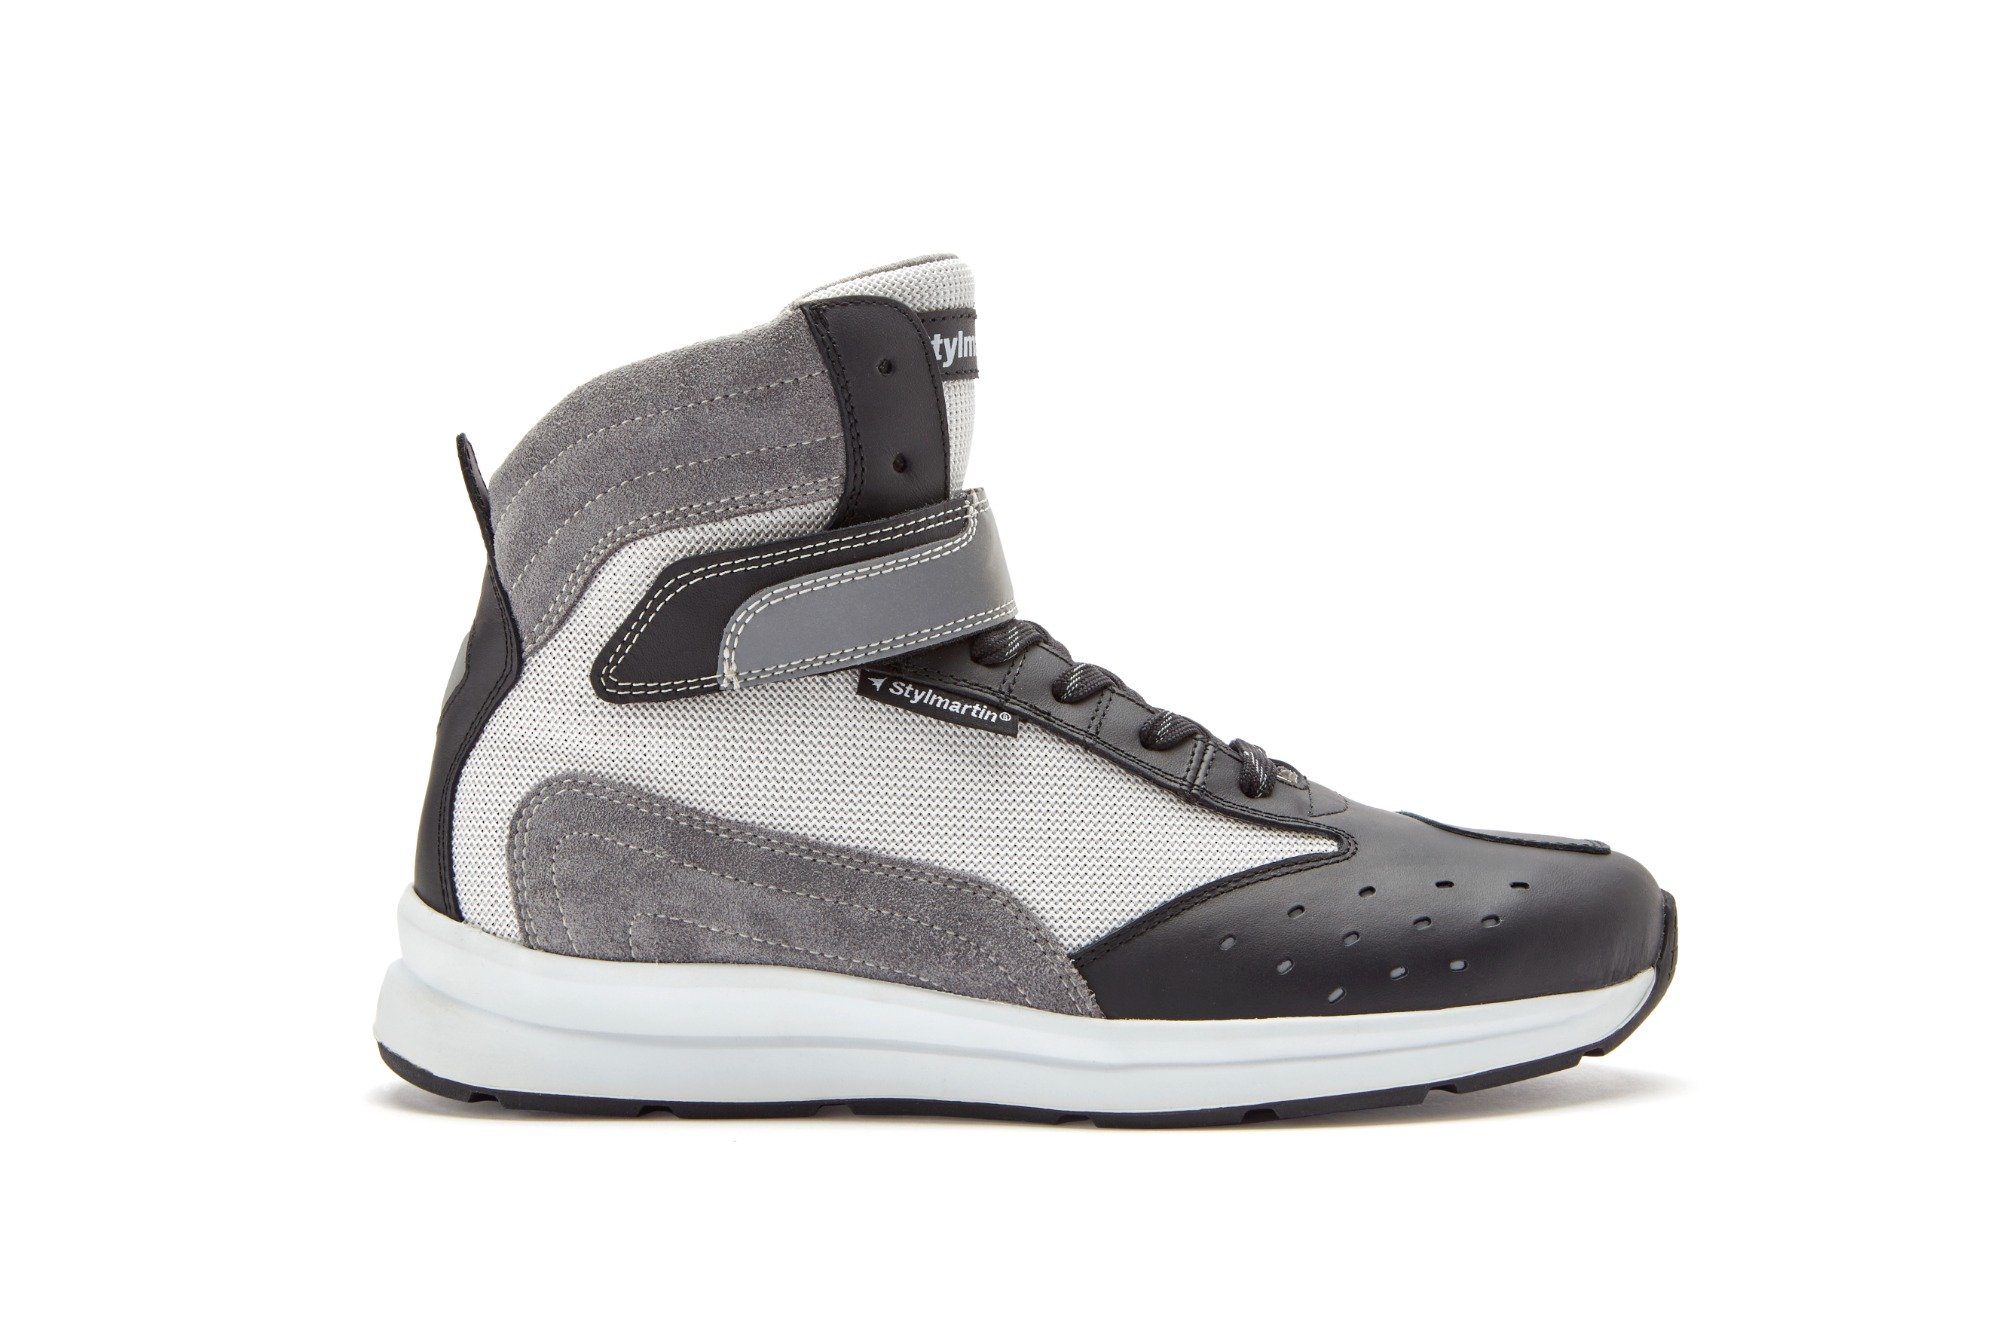 Image of Stylmartin Audax Air Black Anthracite White Size 38 ID 1000001309309